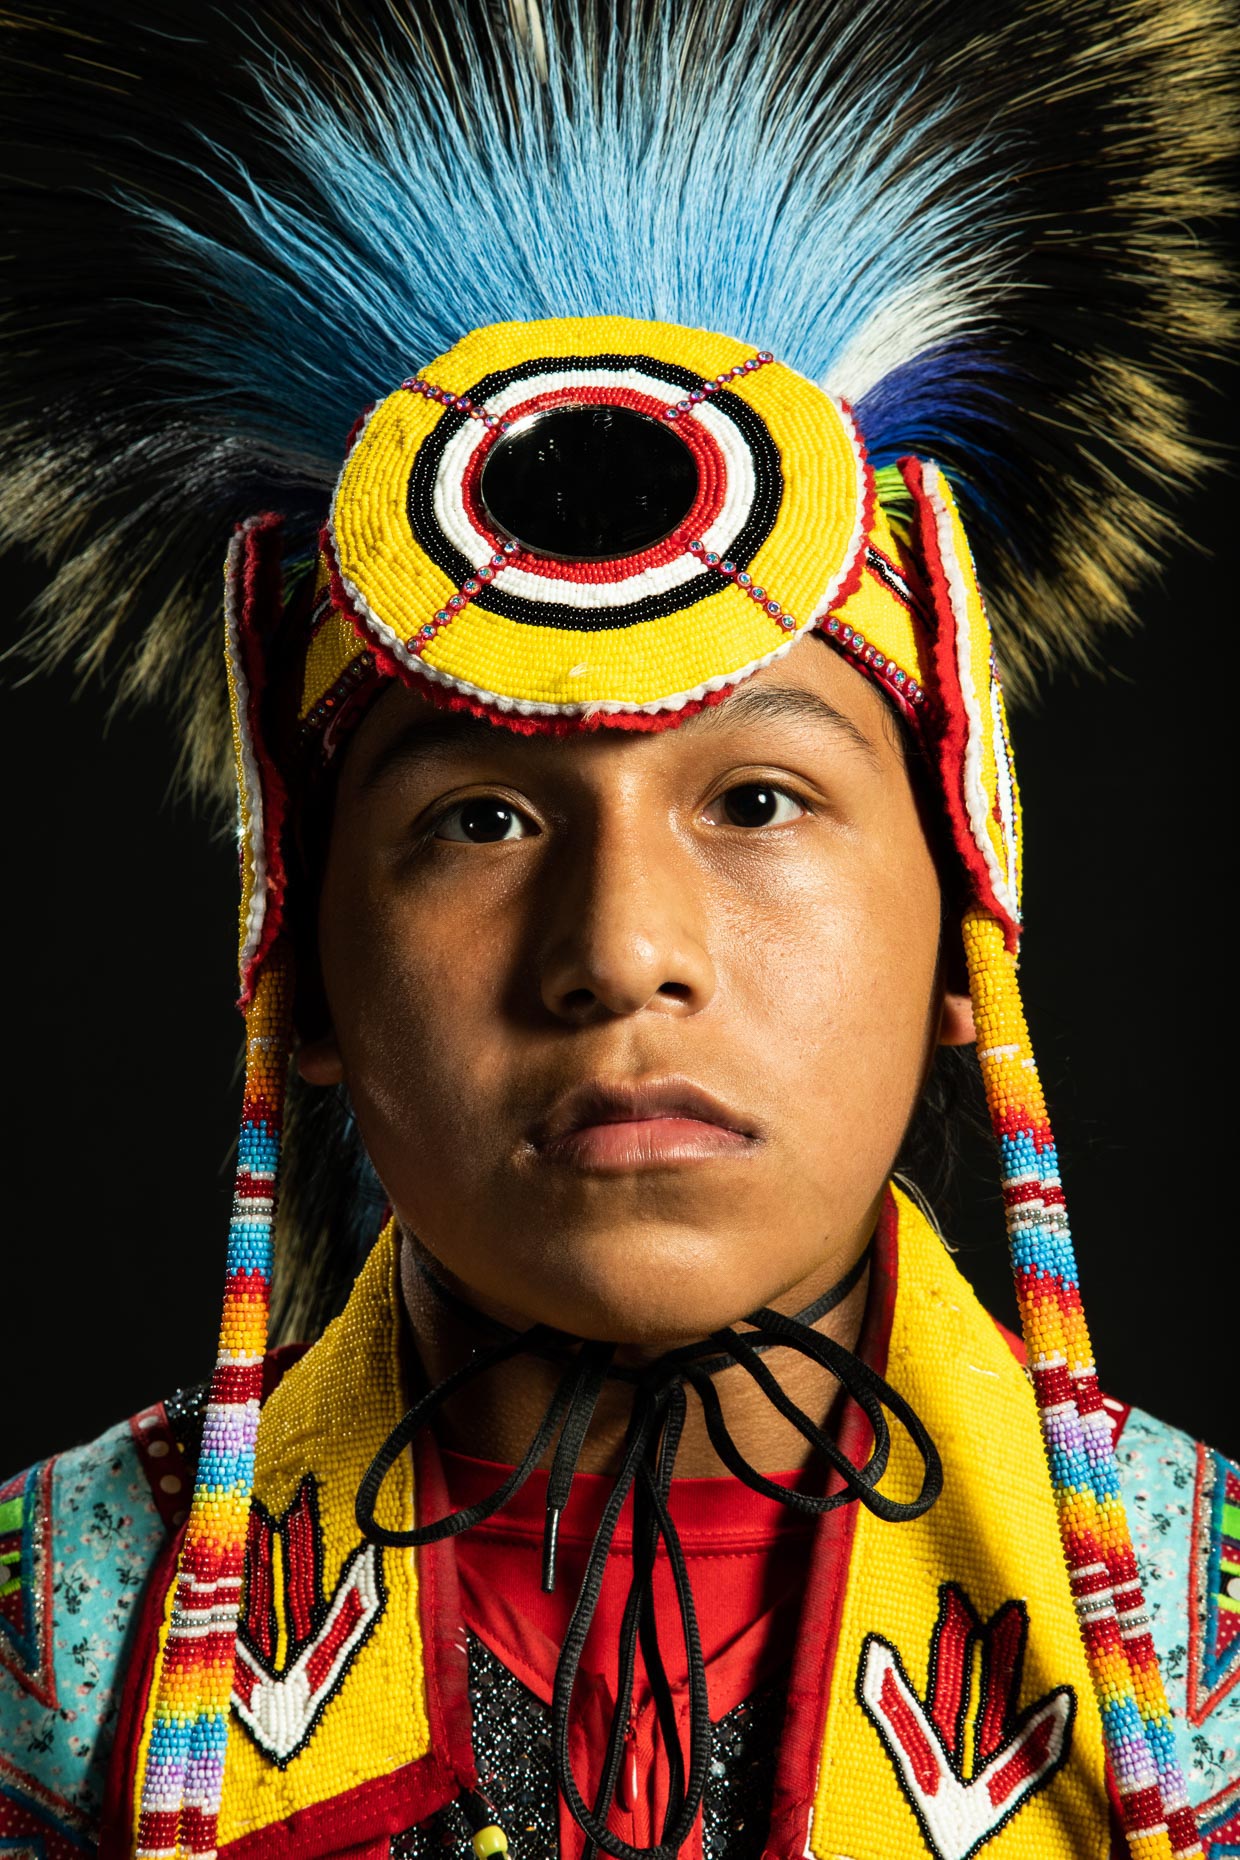 Portrait commission for the First Americans Museum in Oklahoma City. Brett Deering Photography